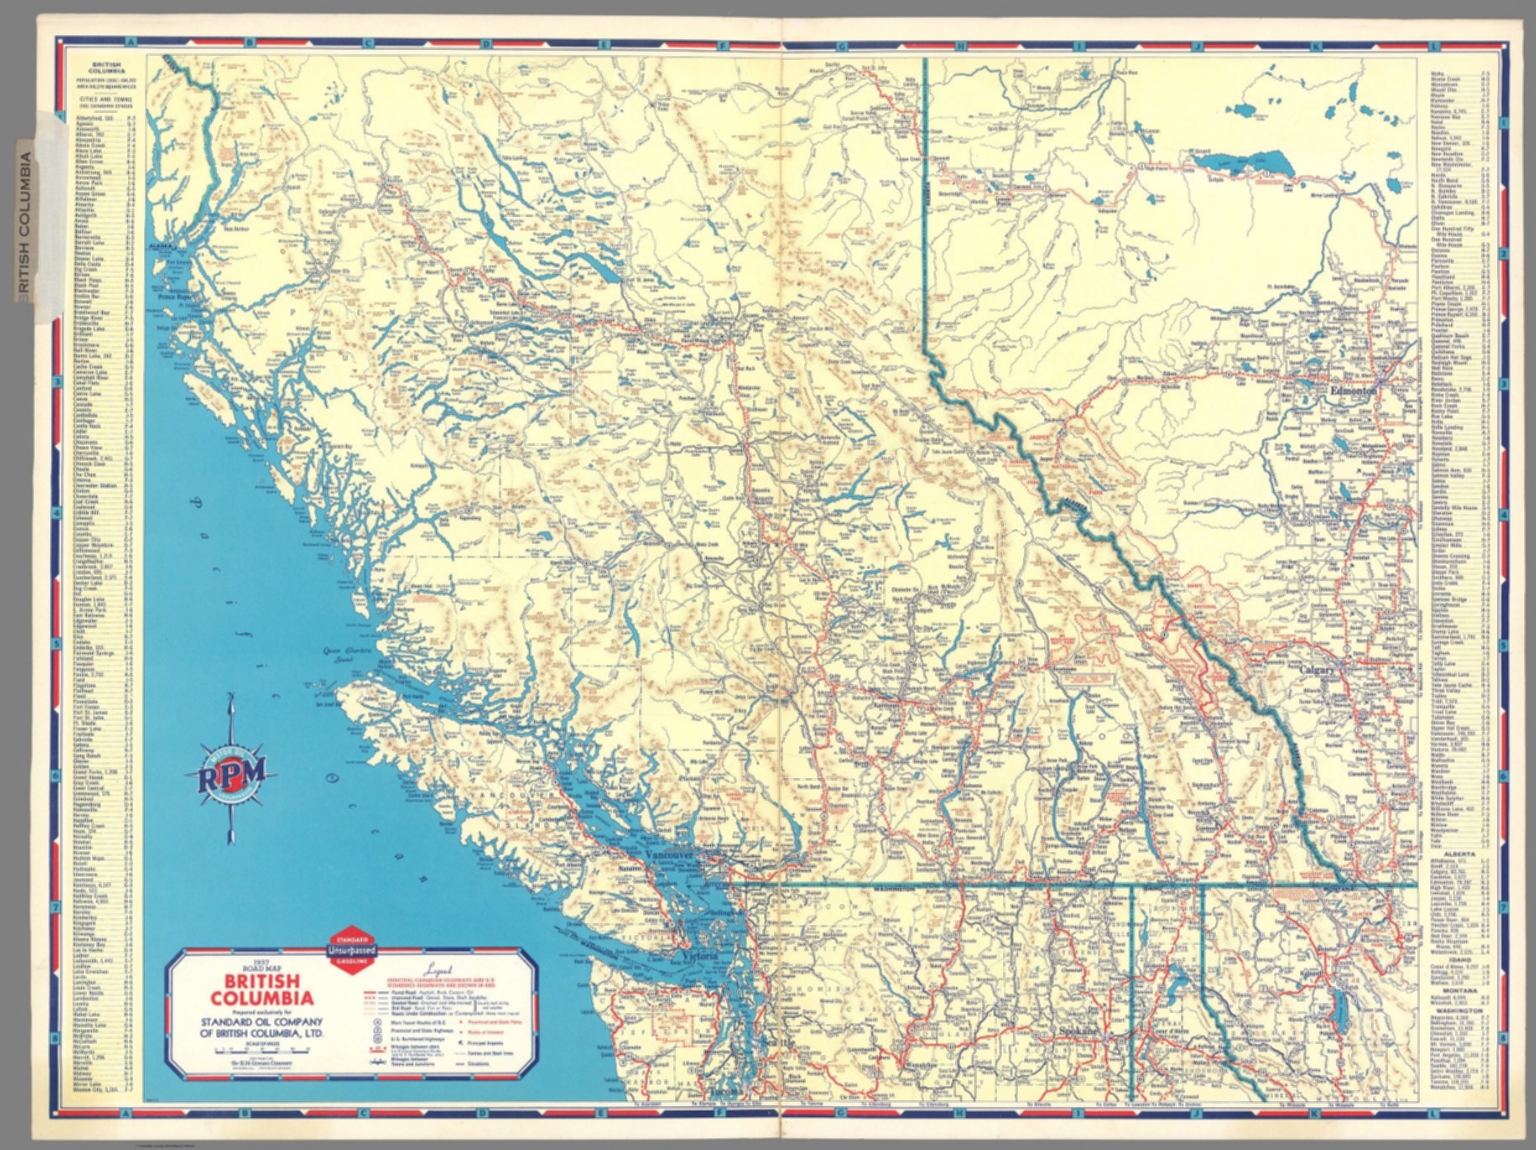 1937 Road Map Of British Columbia David Rumsey Historical Map Collection